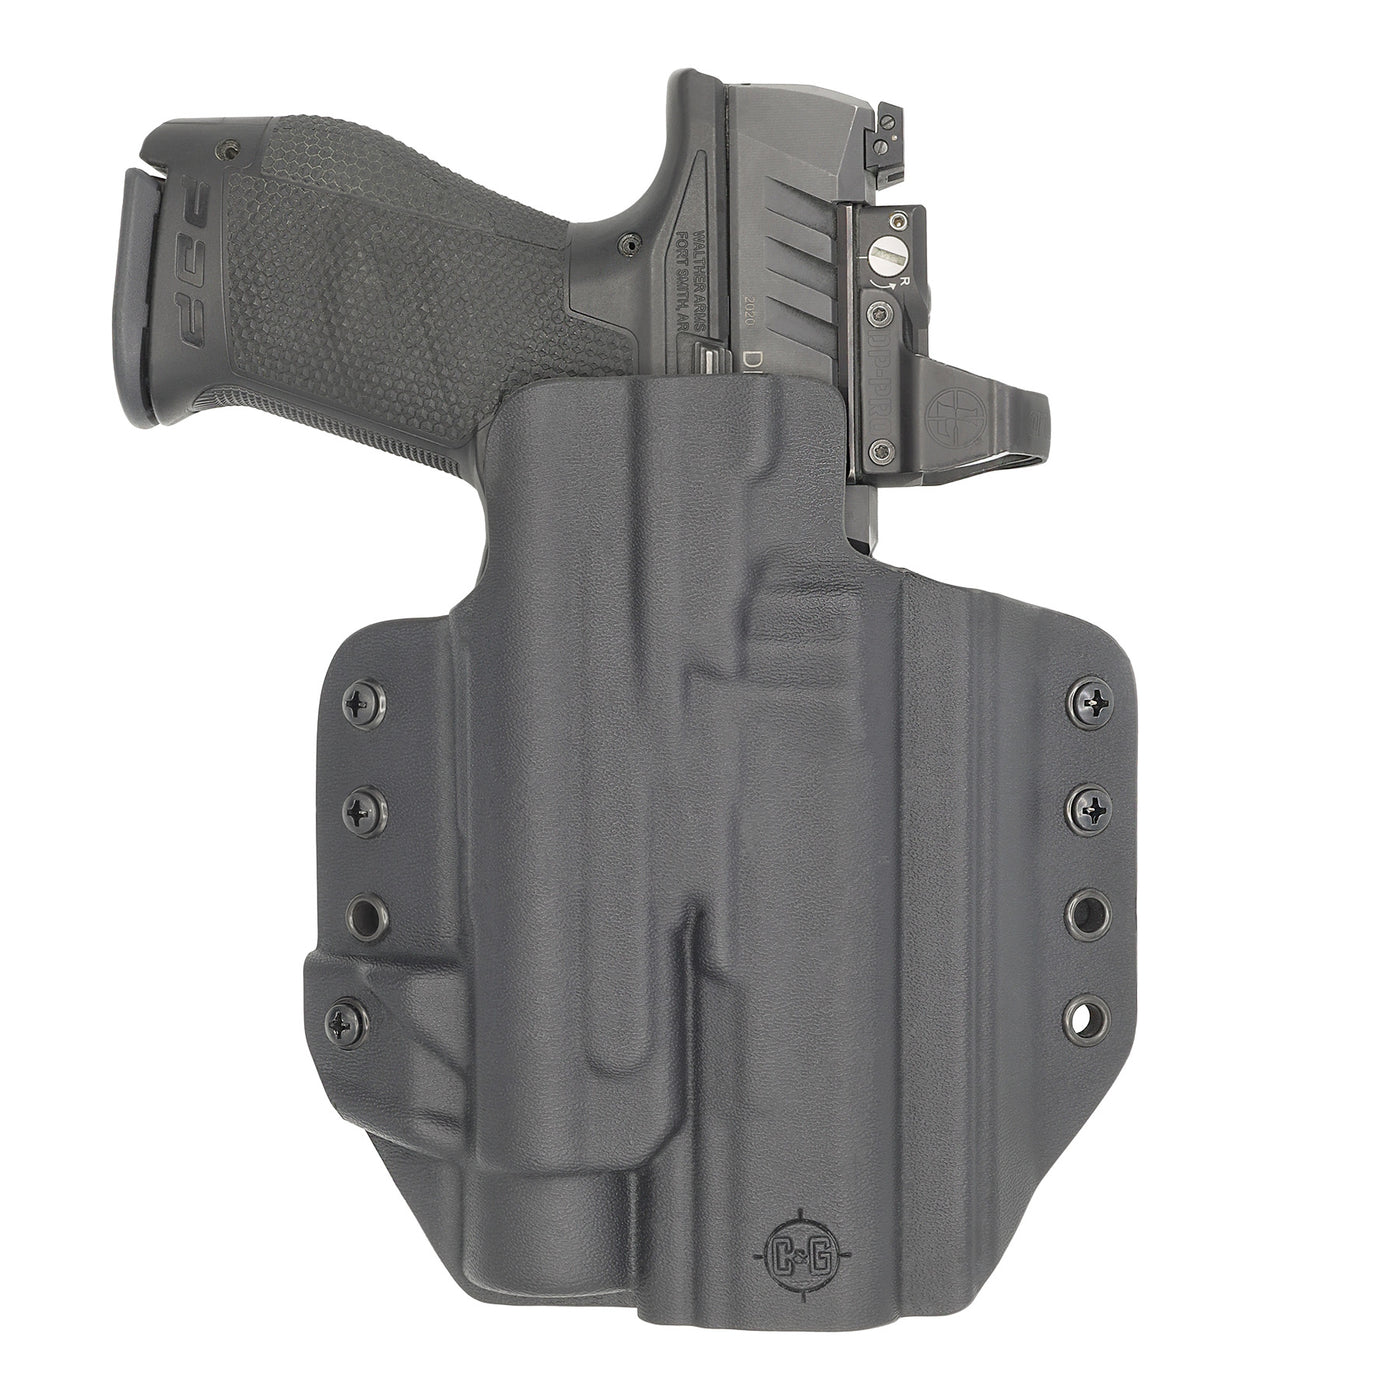 C&G Holsters custom OWB Tactical H&K P30/sk Streamlight TLR1 in holstered position